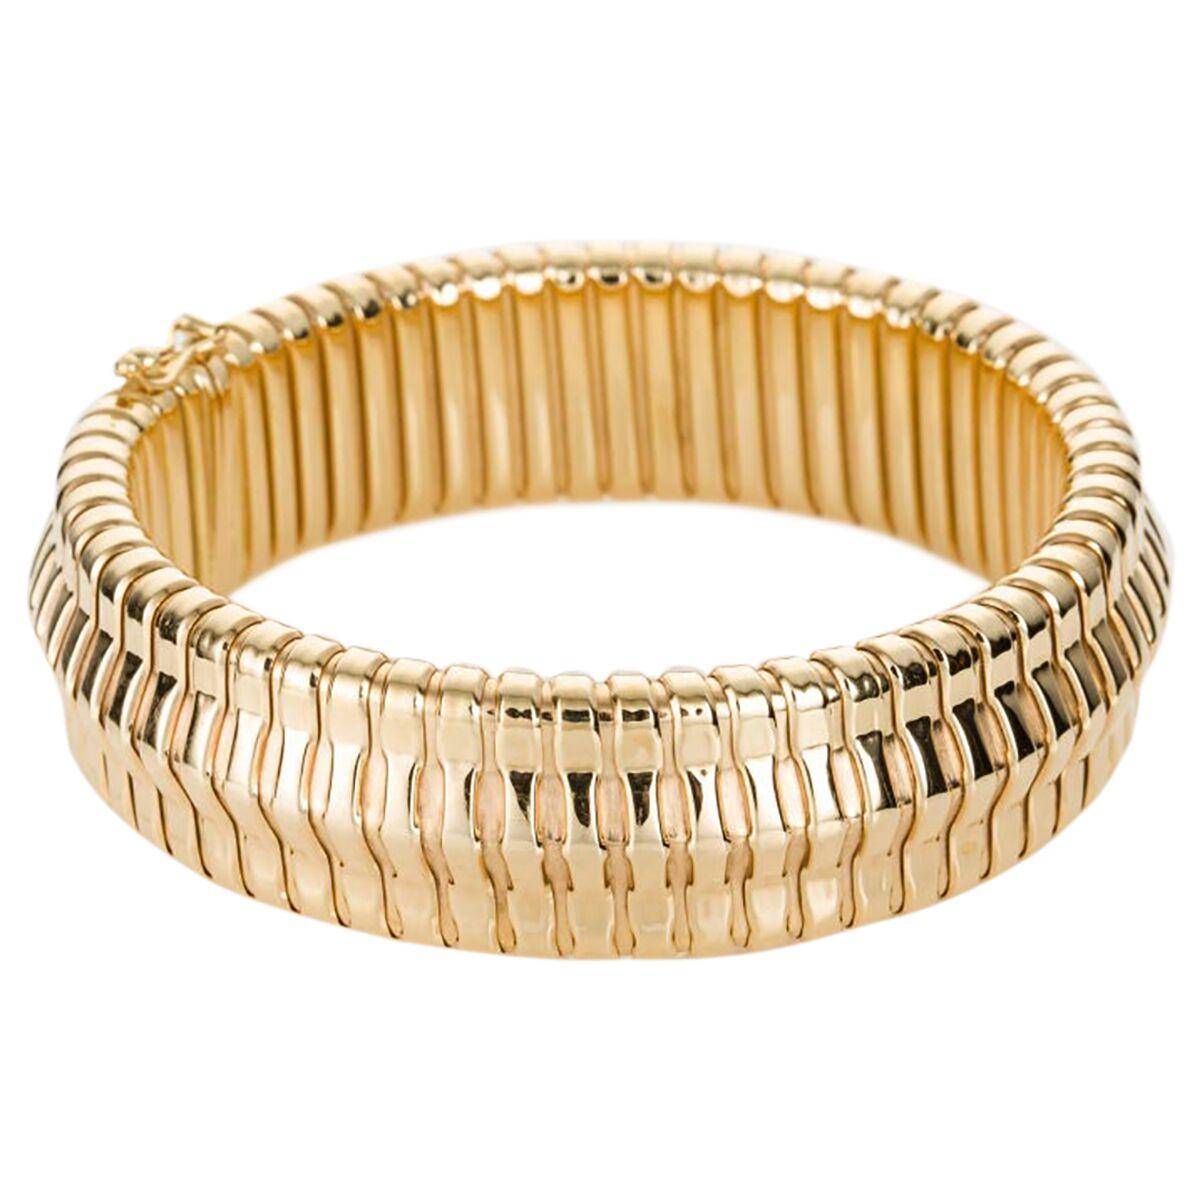 Sleek and stylish this 18k yellow gold gooseneck bracelet sits so comfortably on the wrist you don't even know you have it on. The perfect piece to layer with other bracelets but looks just as good on its own. Made from ribbed gold pieces that work